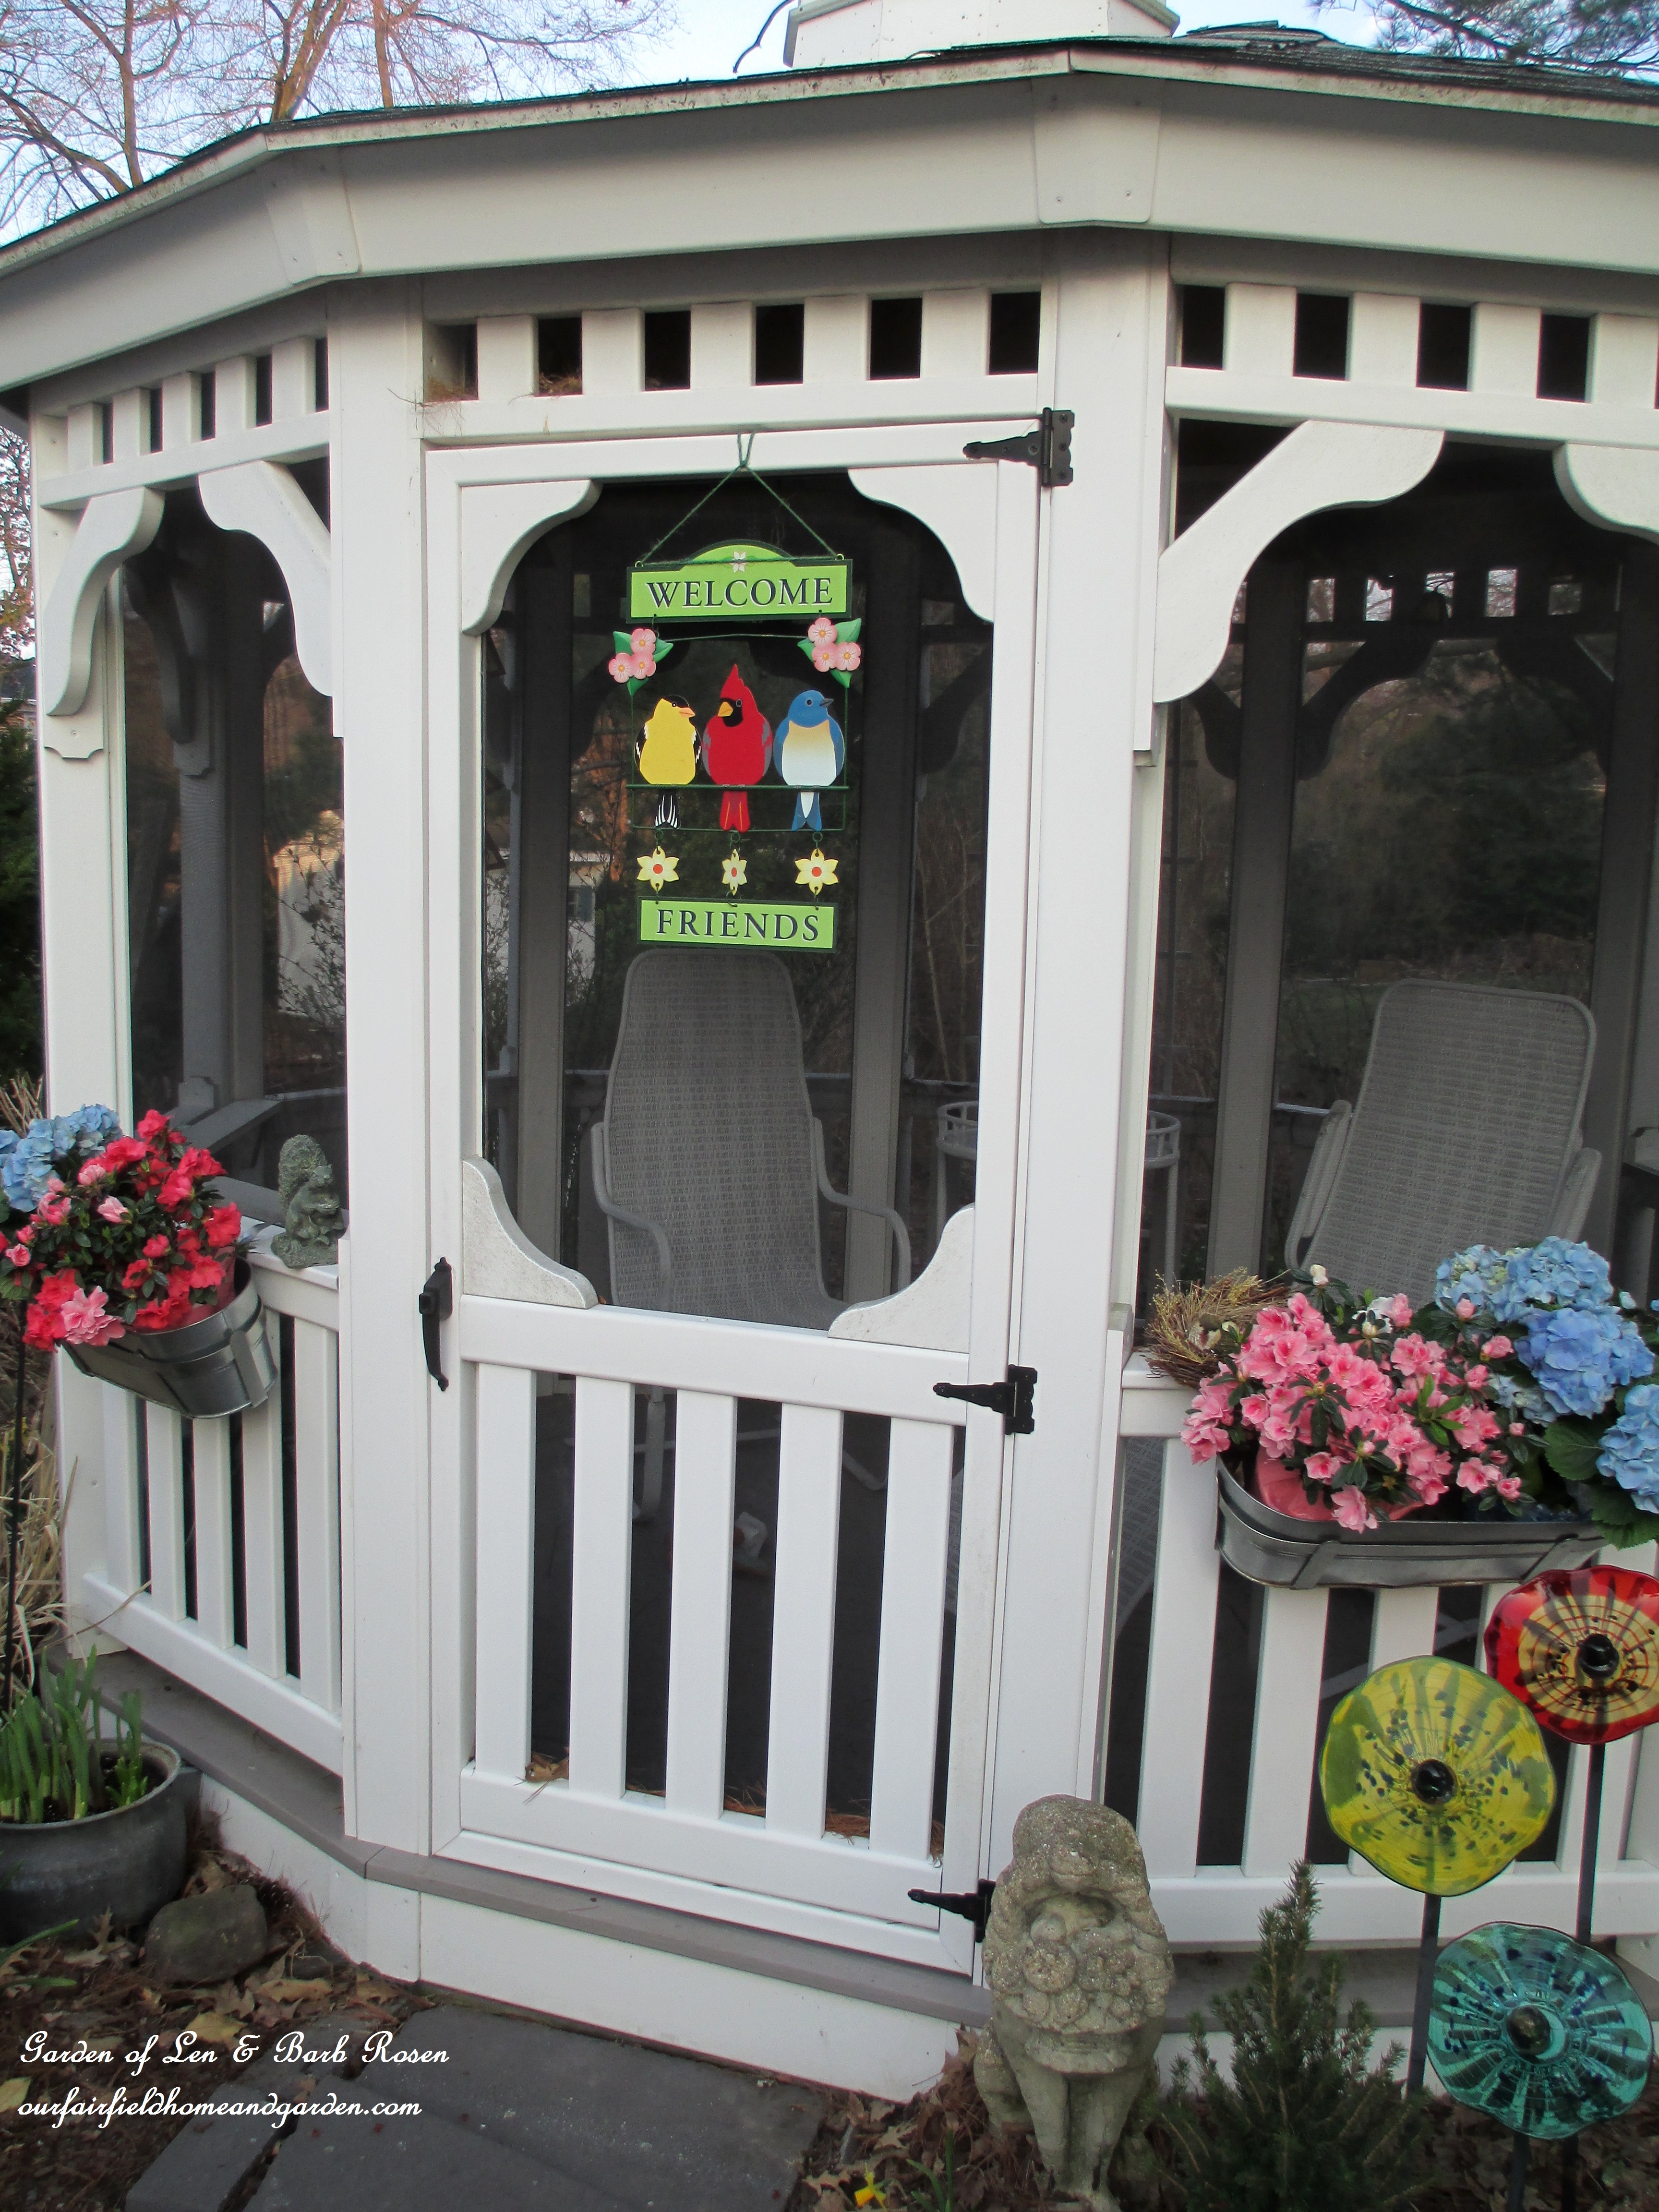 gazebo https://ourfairfieldhomeandgarden.com/signs-of-spring-at-our-fairfield-home-garden/